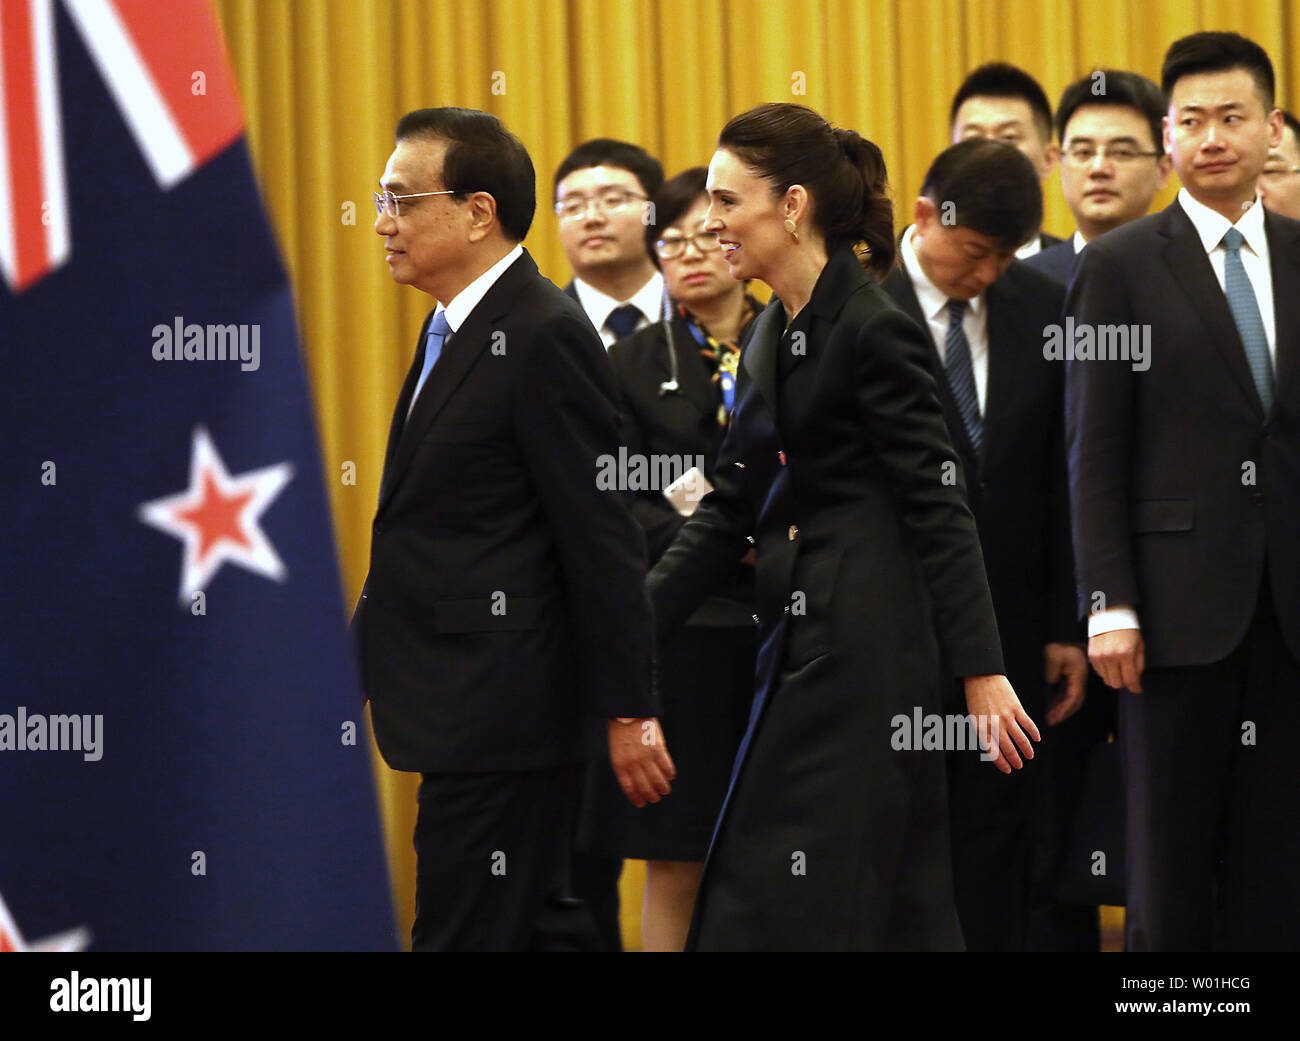 Chinese Premier Li Keqiang (L) introduces New Zealand (NZ) Prime Minister Jacinda Ardern to Chinese ministers during a welcoming ceremony at the Great Hall of the People in Beijing on April 1, 2019.  China and NZ signed agreements on eliminating double taxation and tax avoidance as the two countries look to reset economic relations.   Photo by Stephen Shaver/UPI Stock Photo